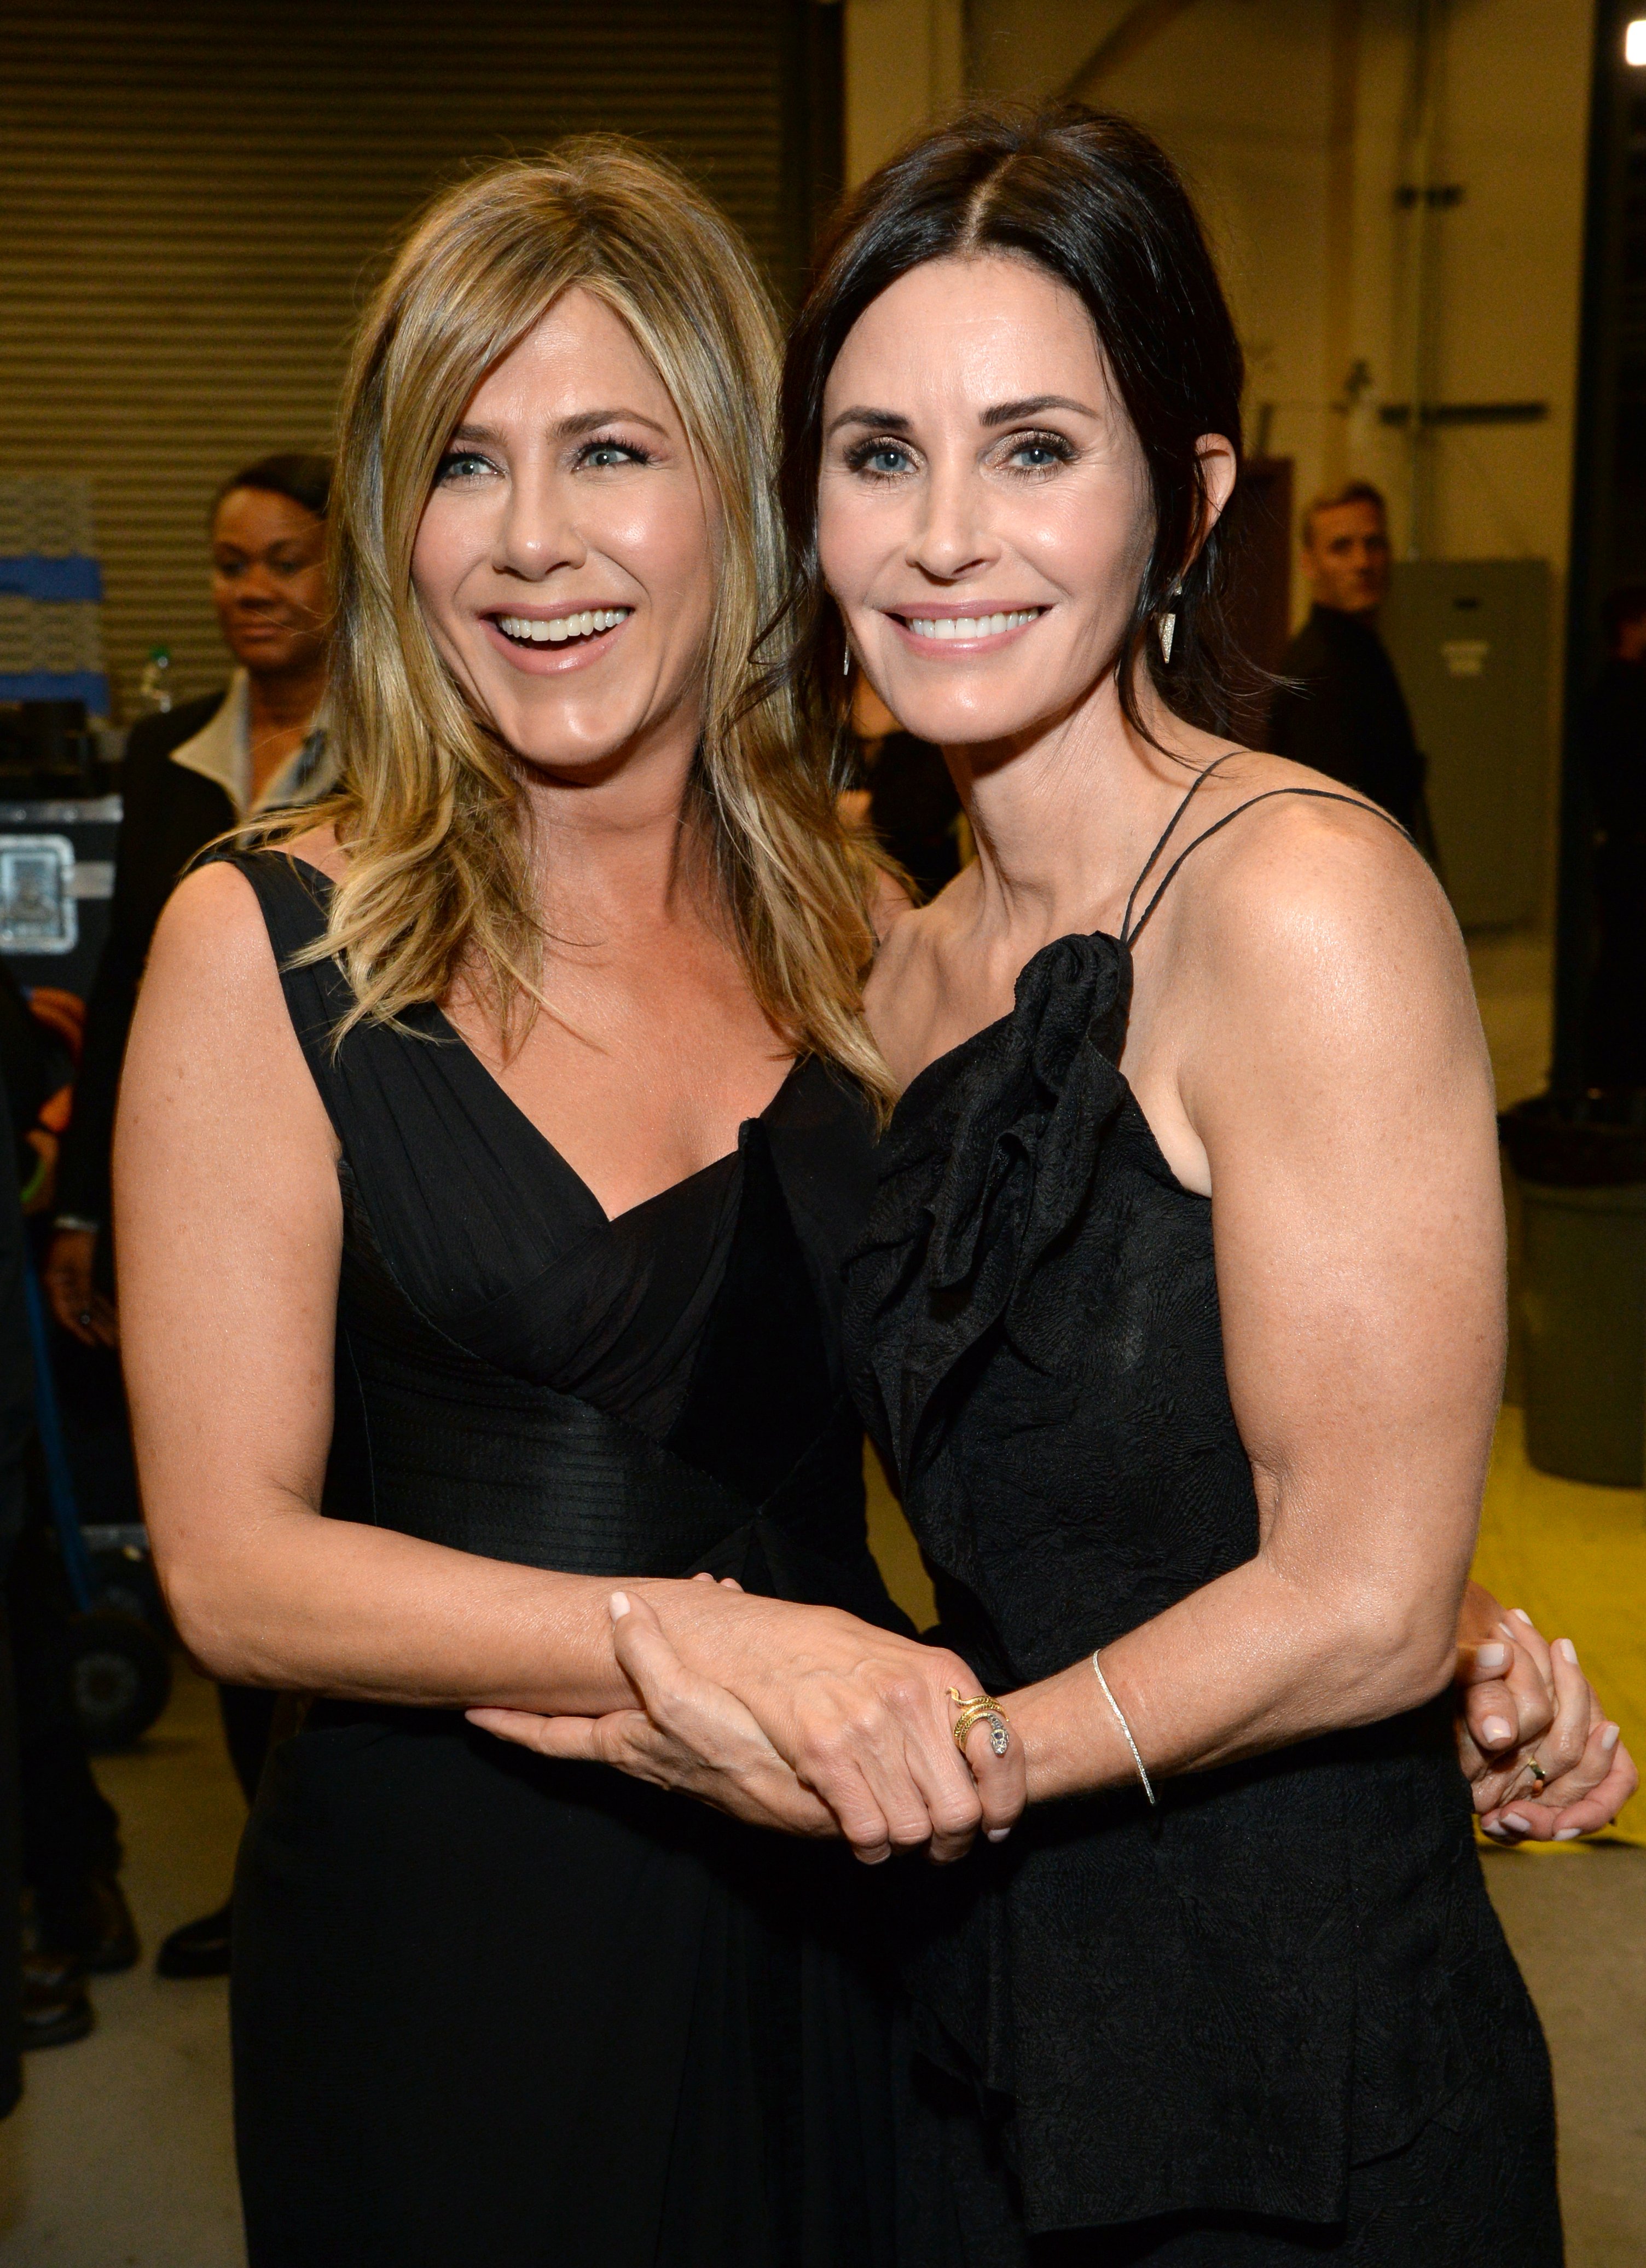 Jennifer Aniston and Courteney Cox attend the American Film Institute's 46th Life Achievement Award Gala at Dolby Theatre on June 7, 2018 in Hollywood, California. ┃Source: Getty Images